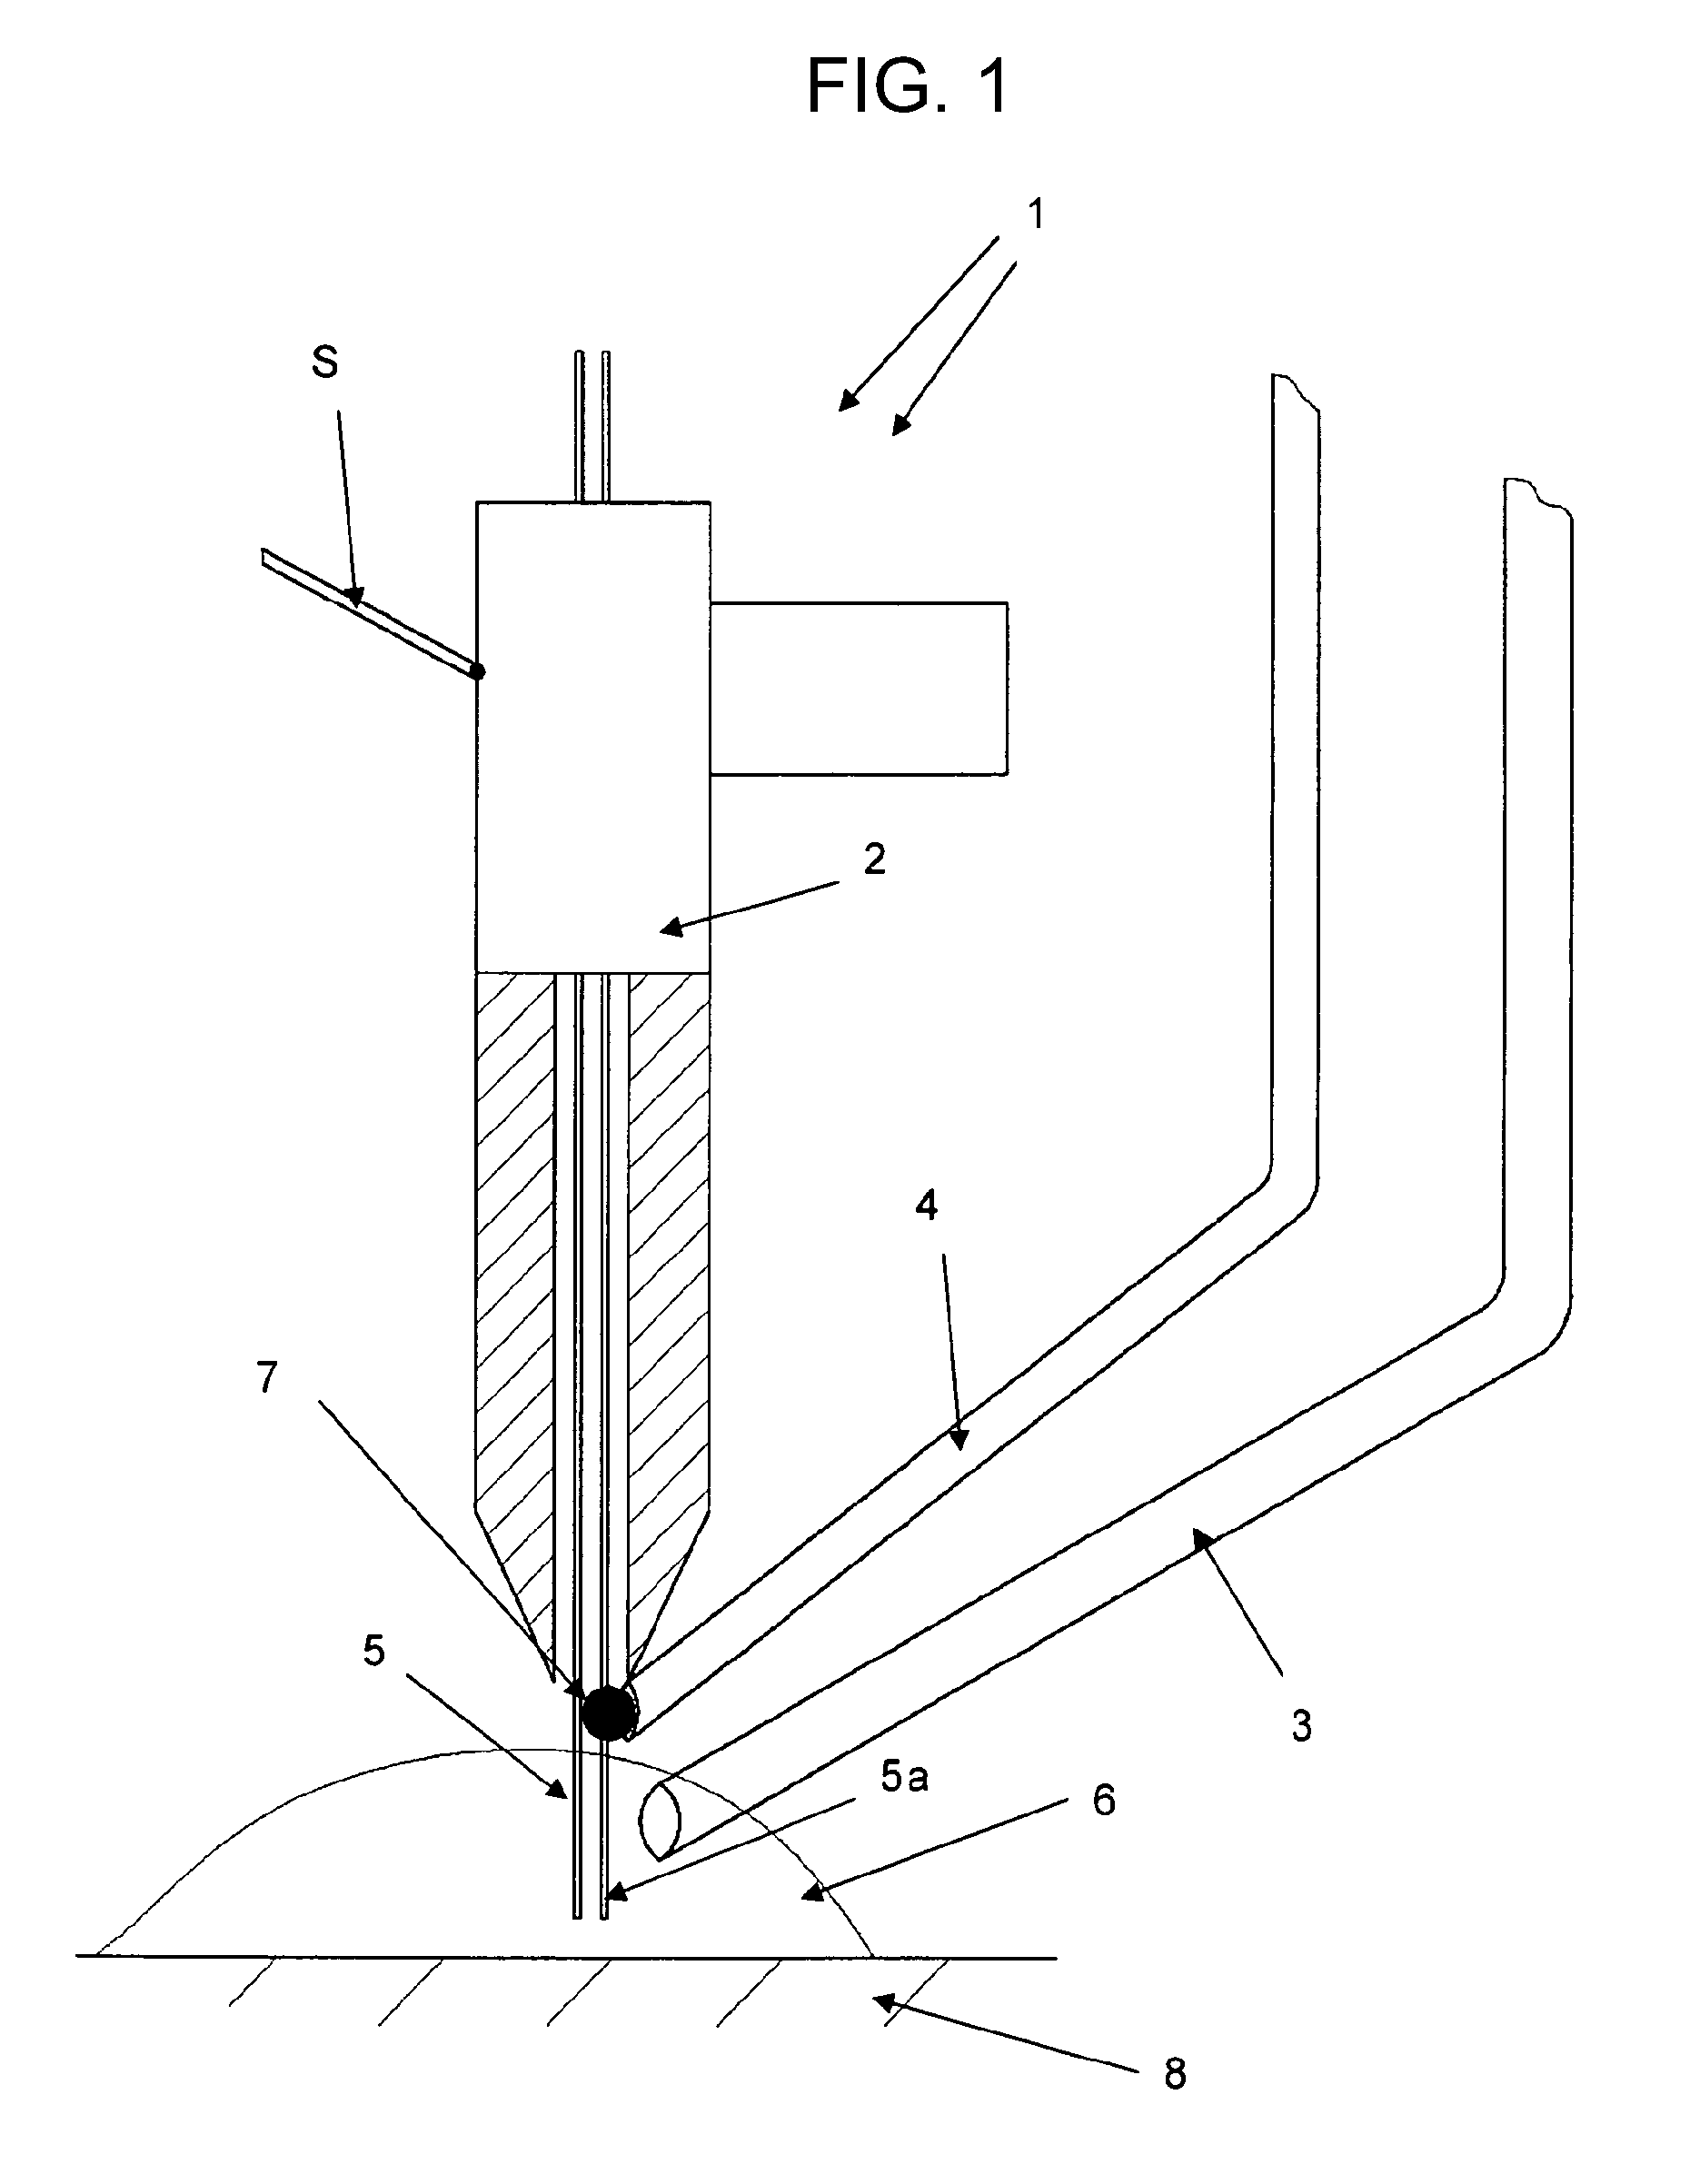 Method of welding a wear layer onto a parent material using a plurality of flux-cored wire electrodes, metal powder and welding powder